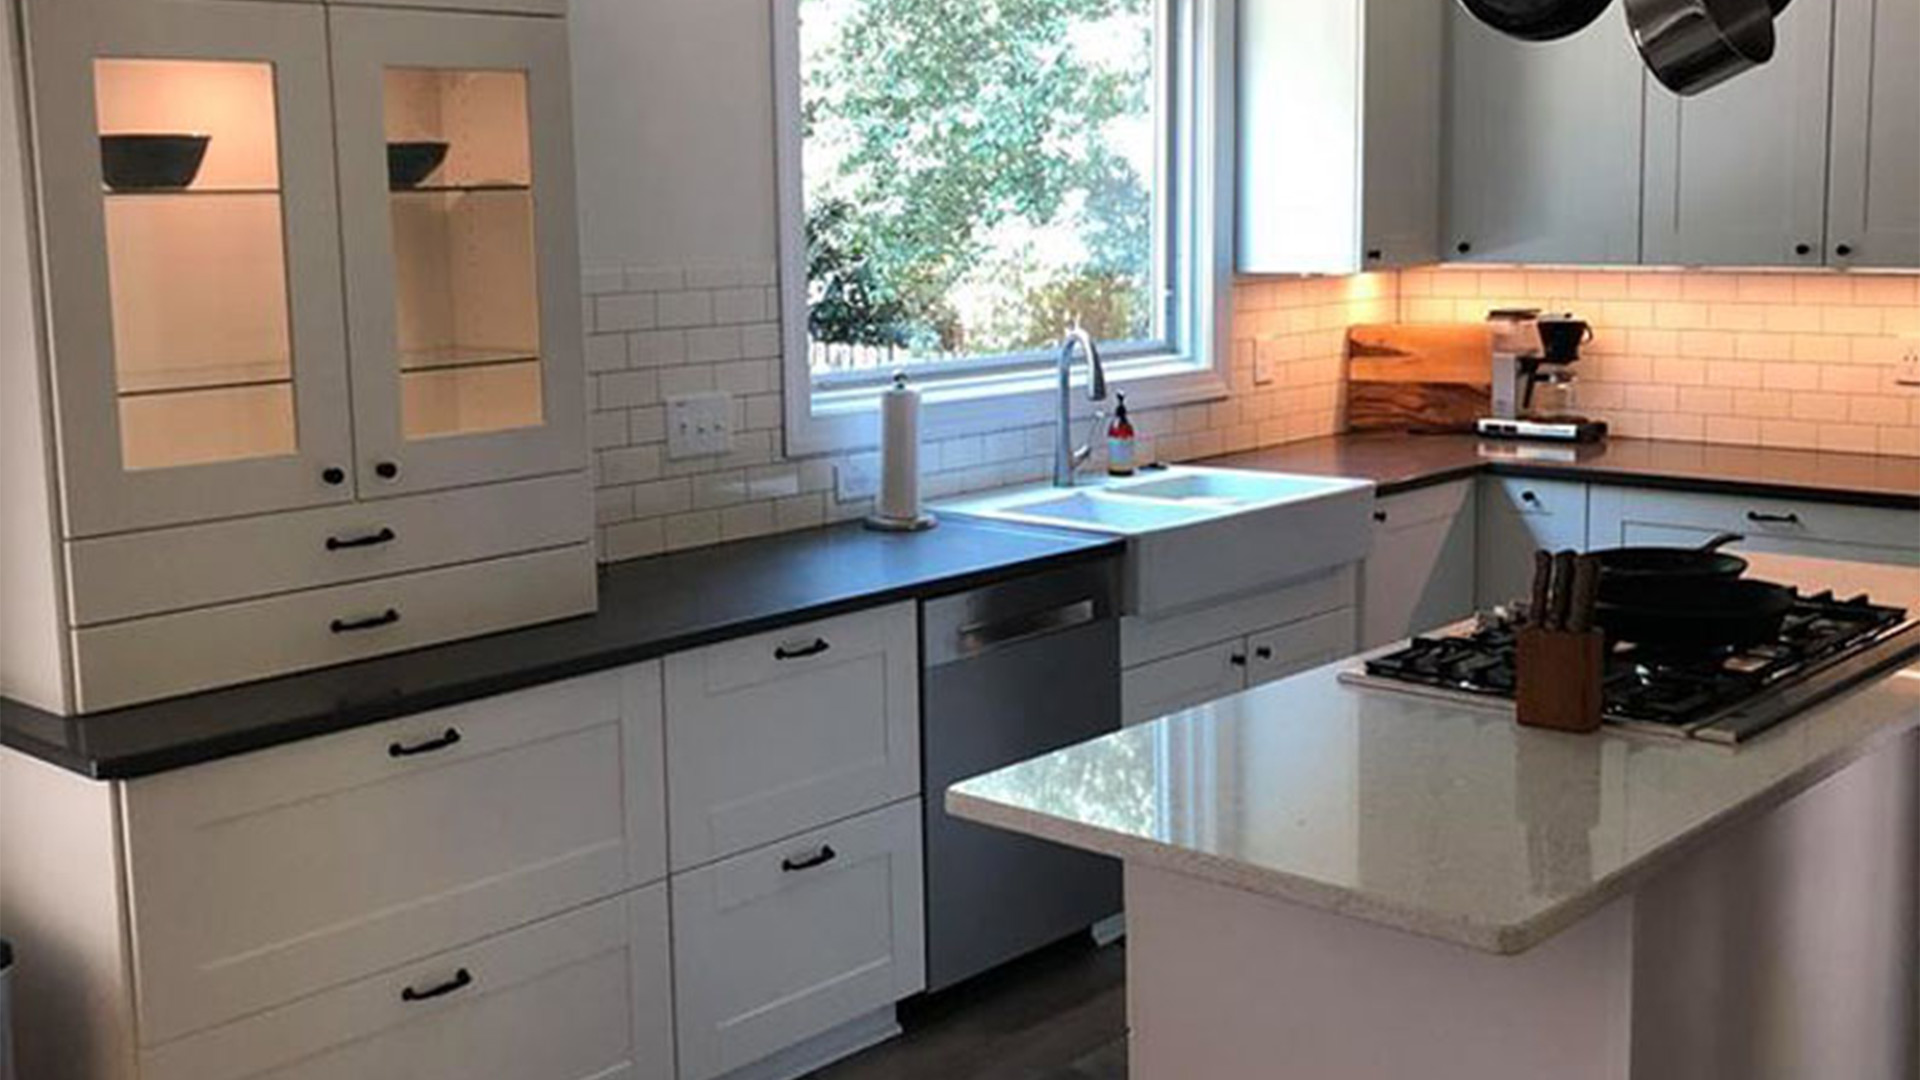 residential property kitchen interiors with wooden white cabinets and black countertops raleigh nc